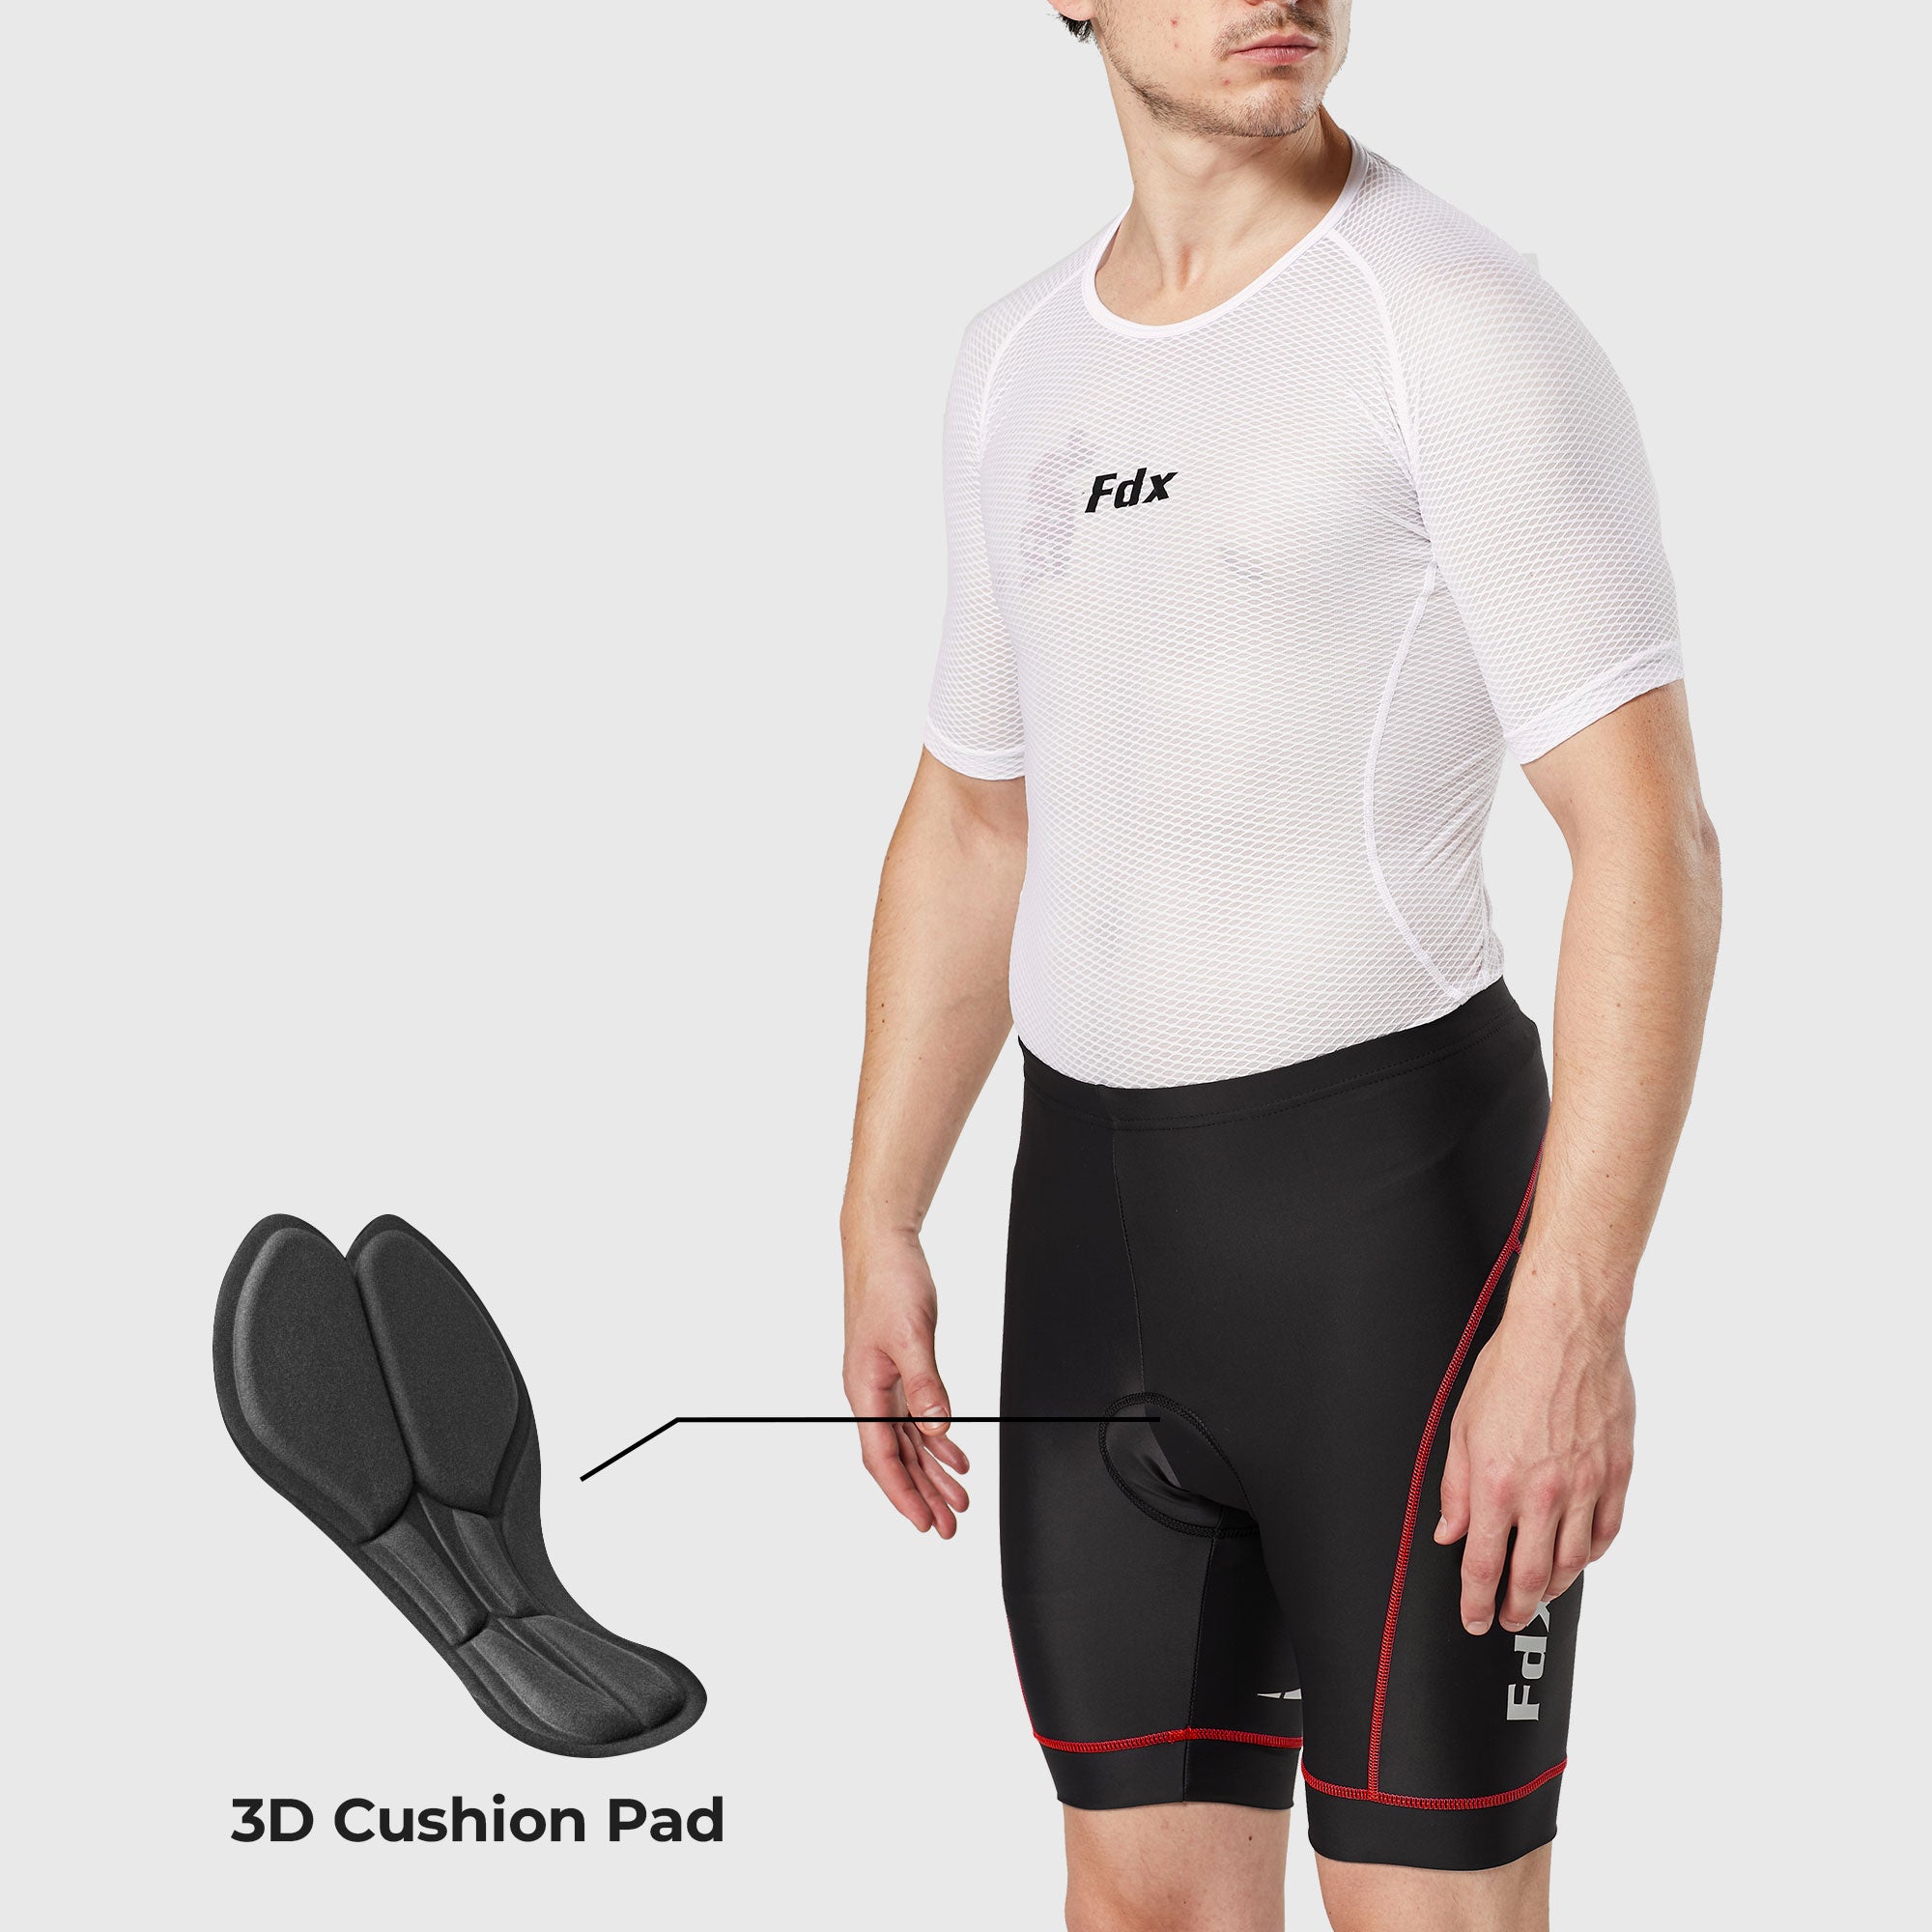 Fdx Men's Black & Red Gel Padded Cycling Shorts for Summer Best Outdoor Knickers Road Bike Short Length Pants - Ridest